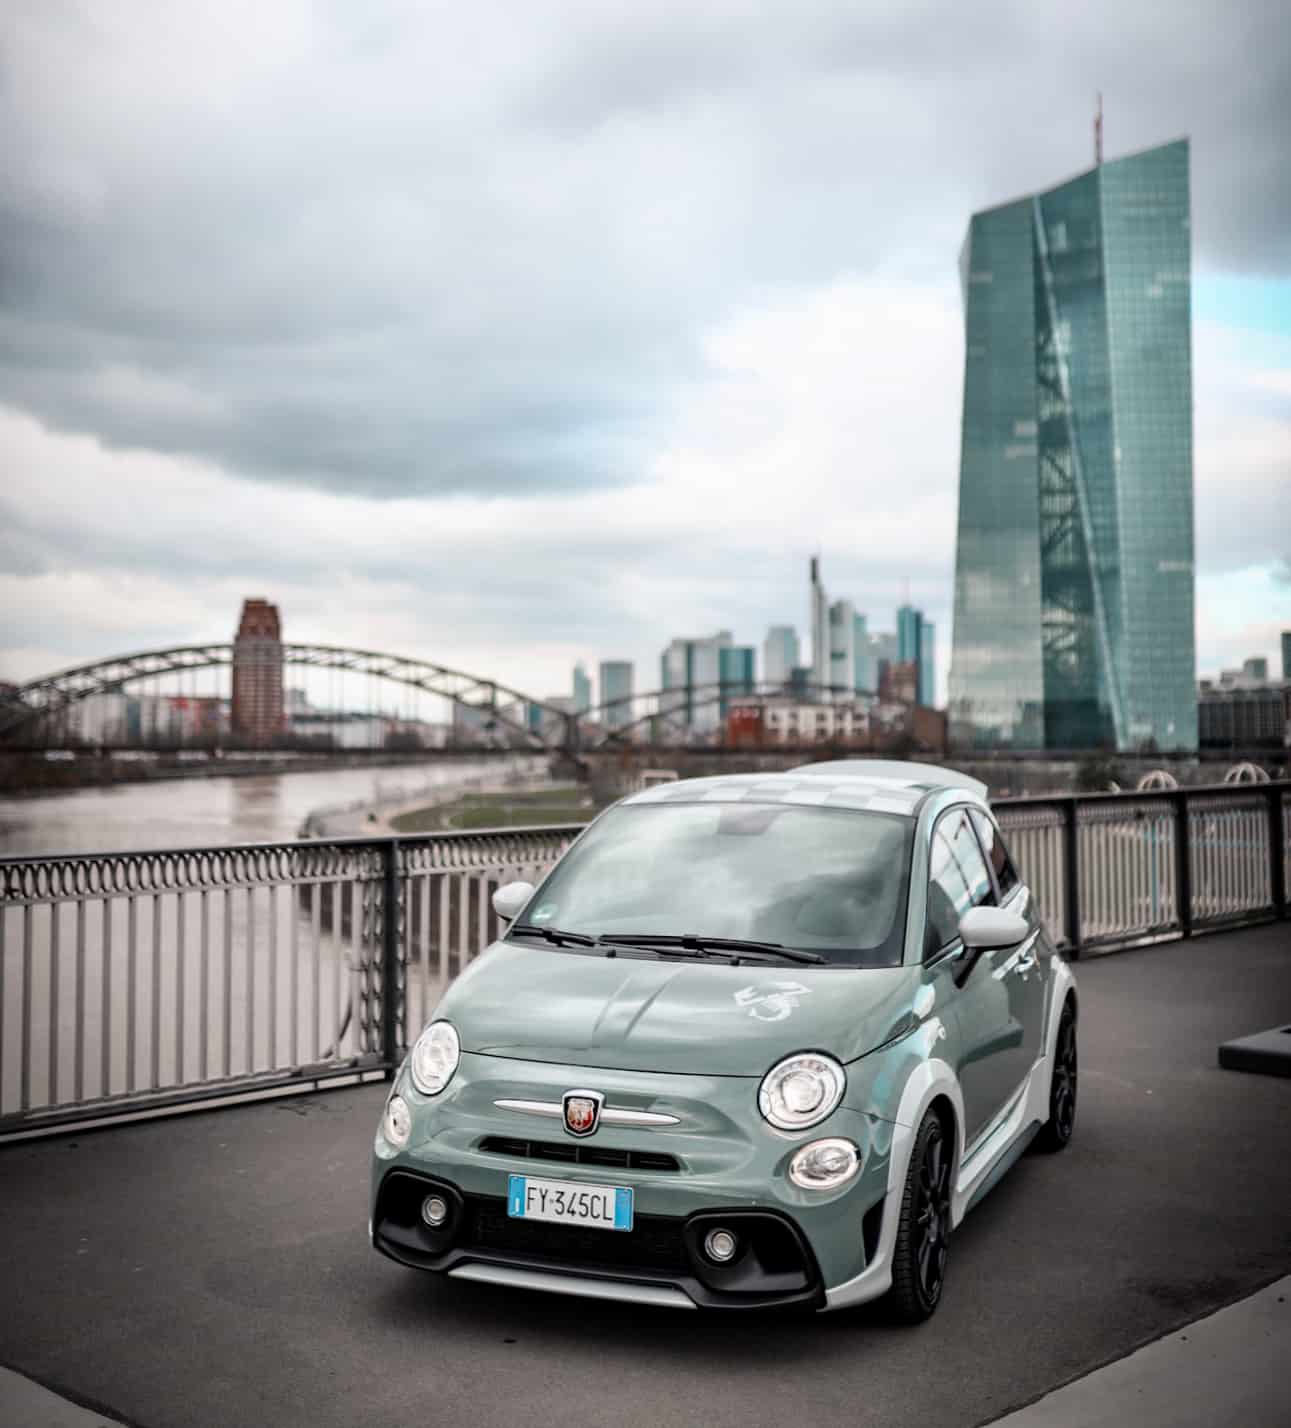 Abarth, Abarth resumes 70th anniversary tour of Europe, ClassicCars.com Journal